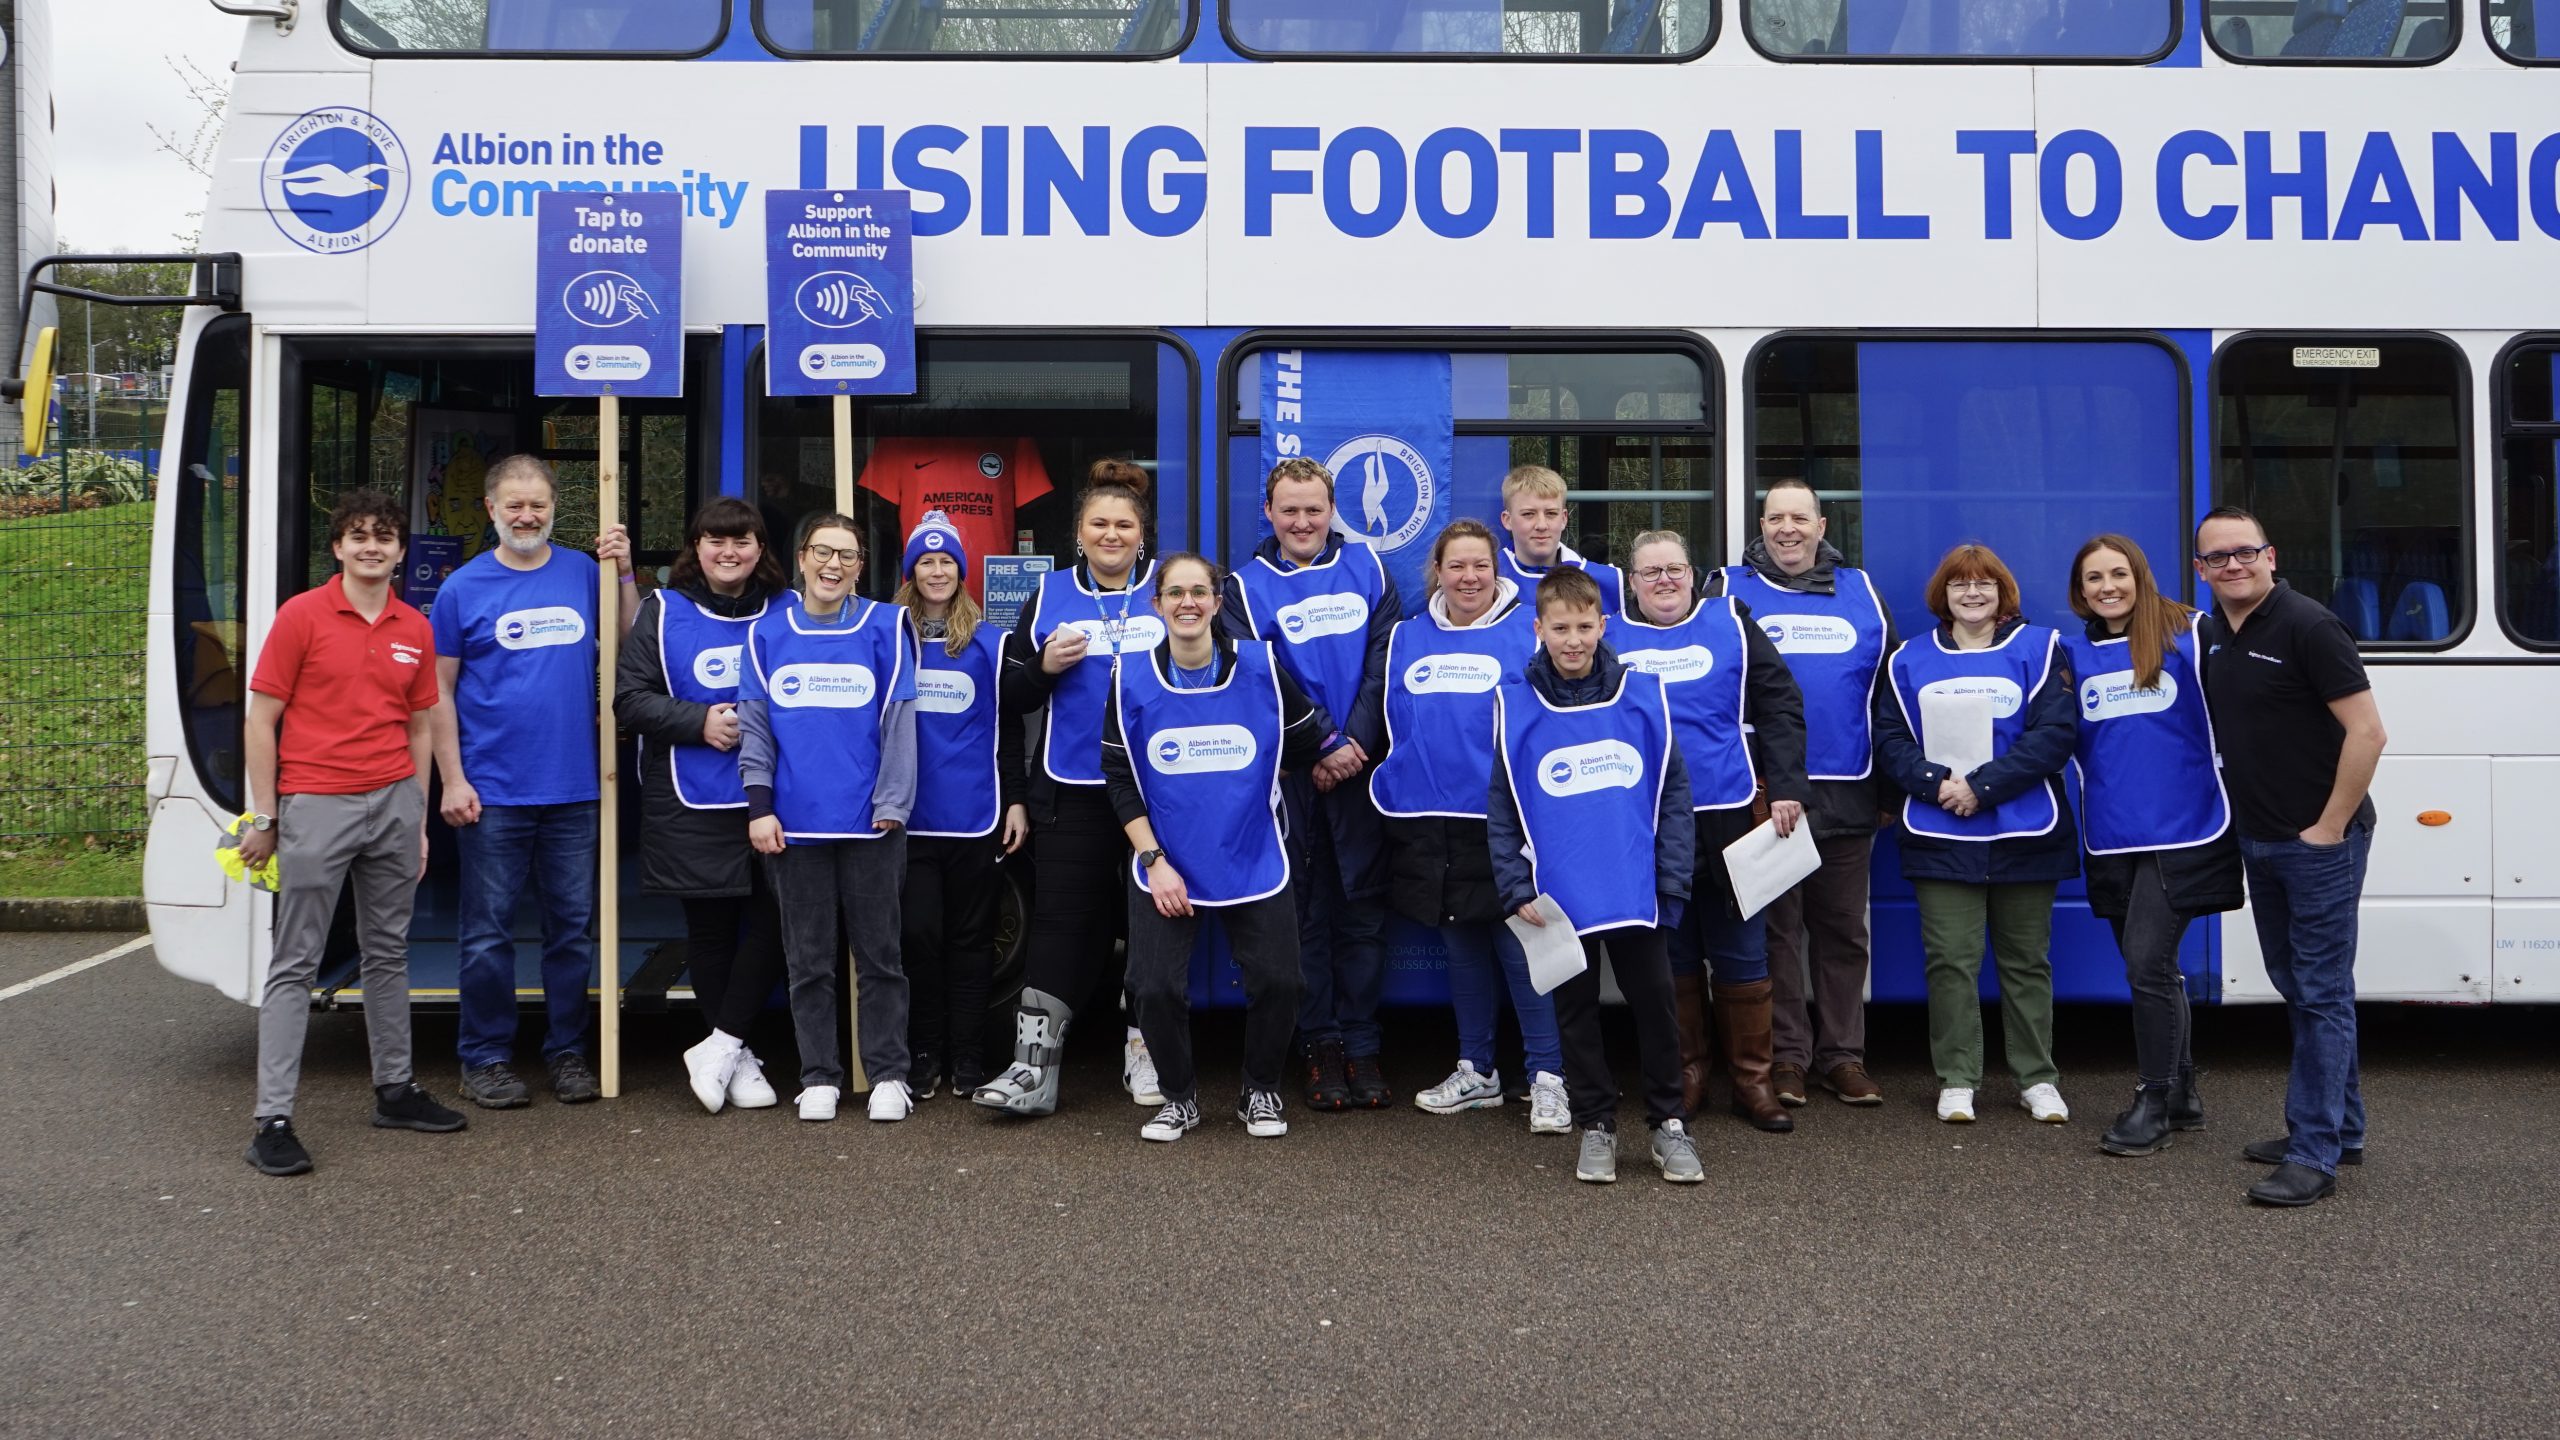 Fundraising success as AITC raise over £30,000 during flagship campaign